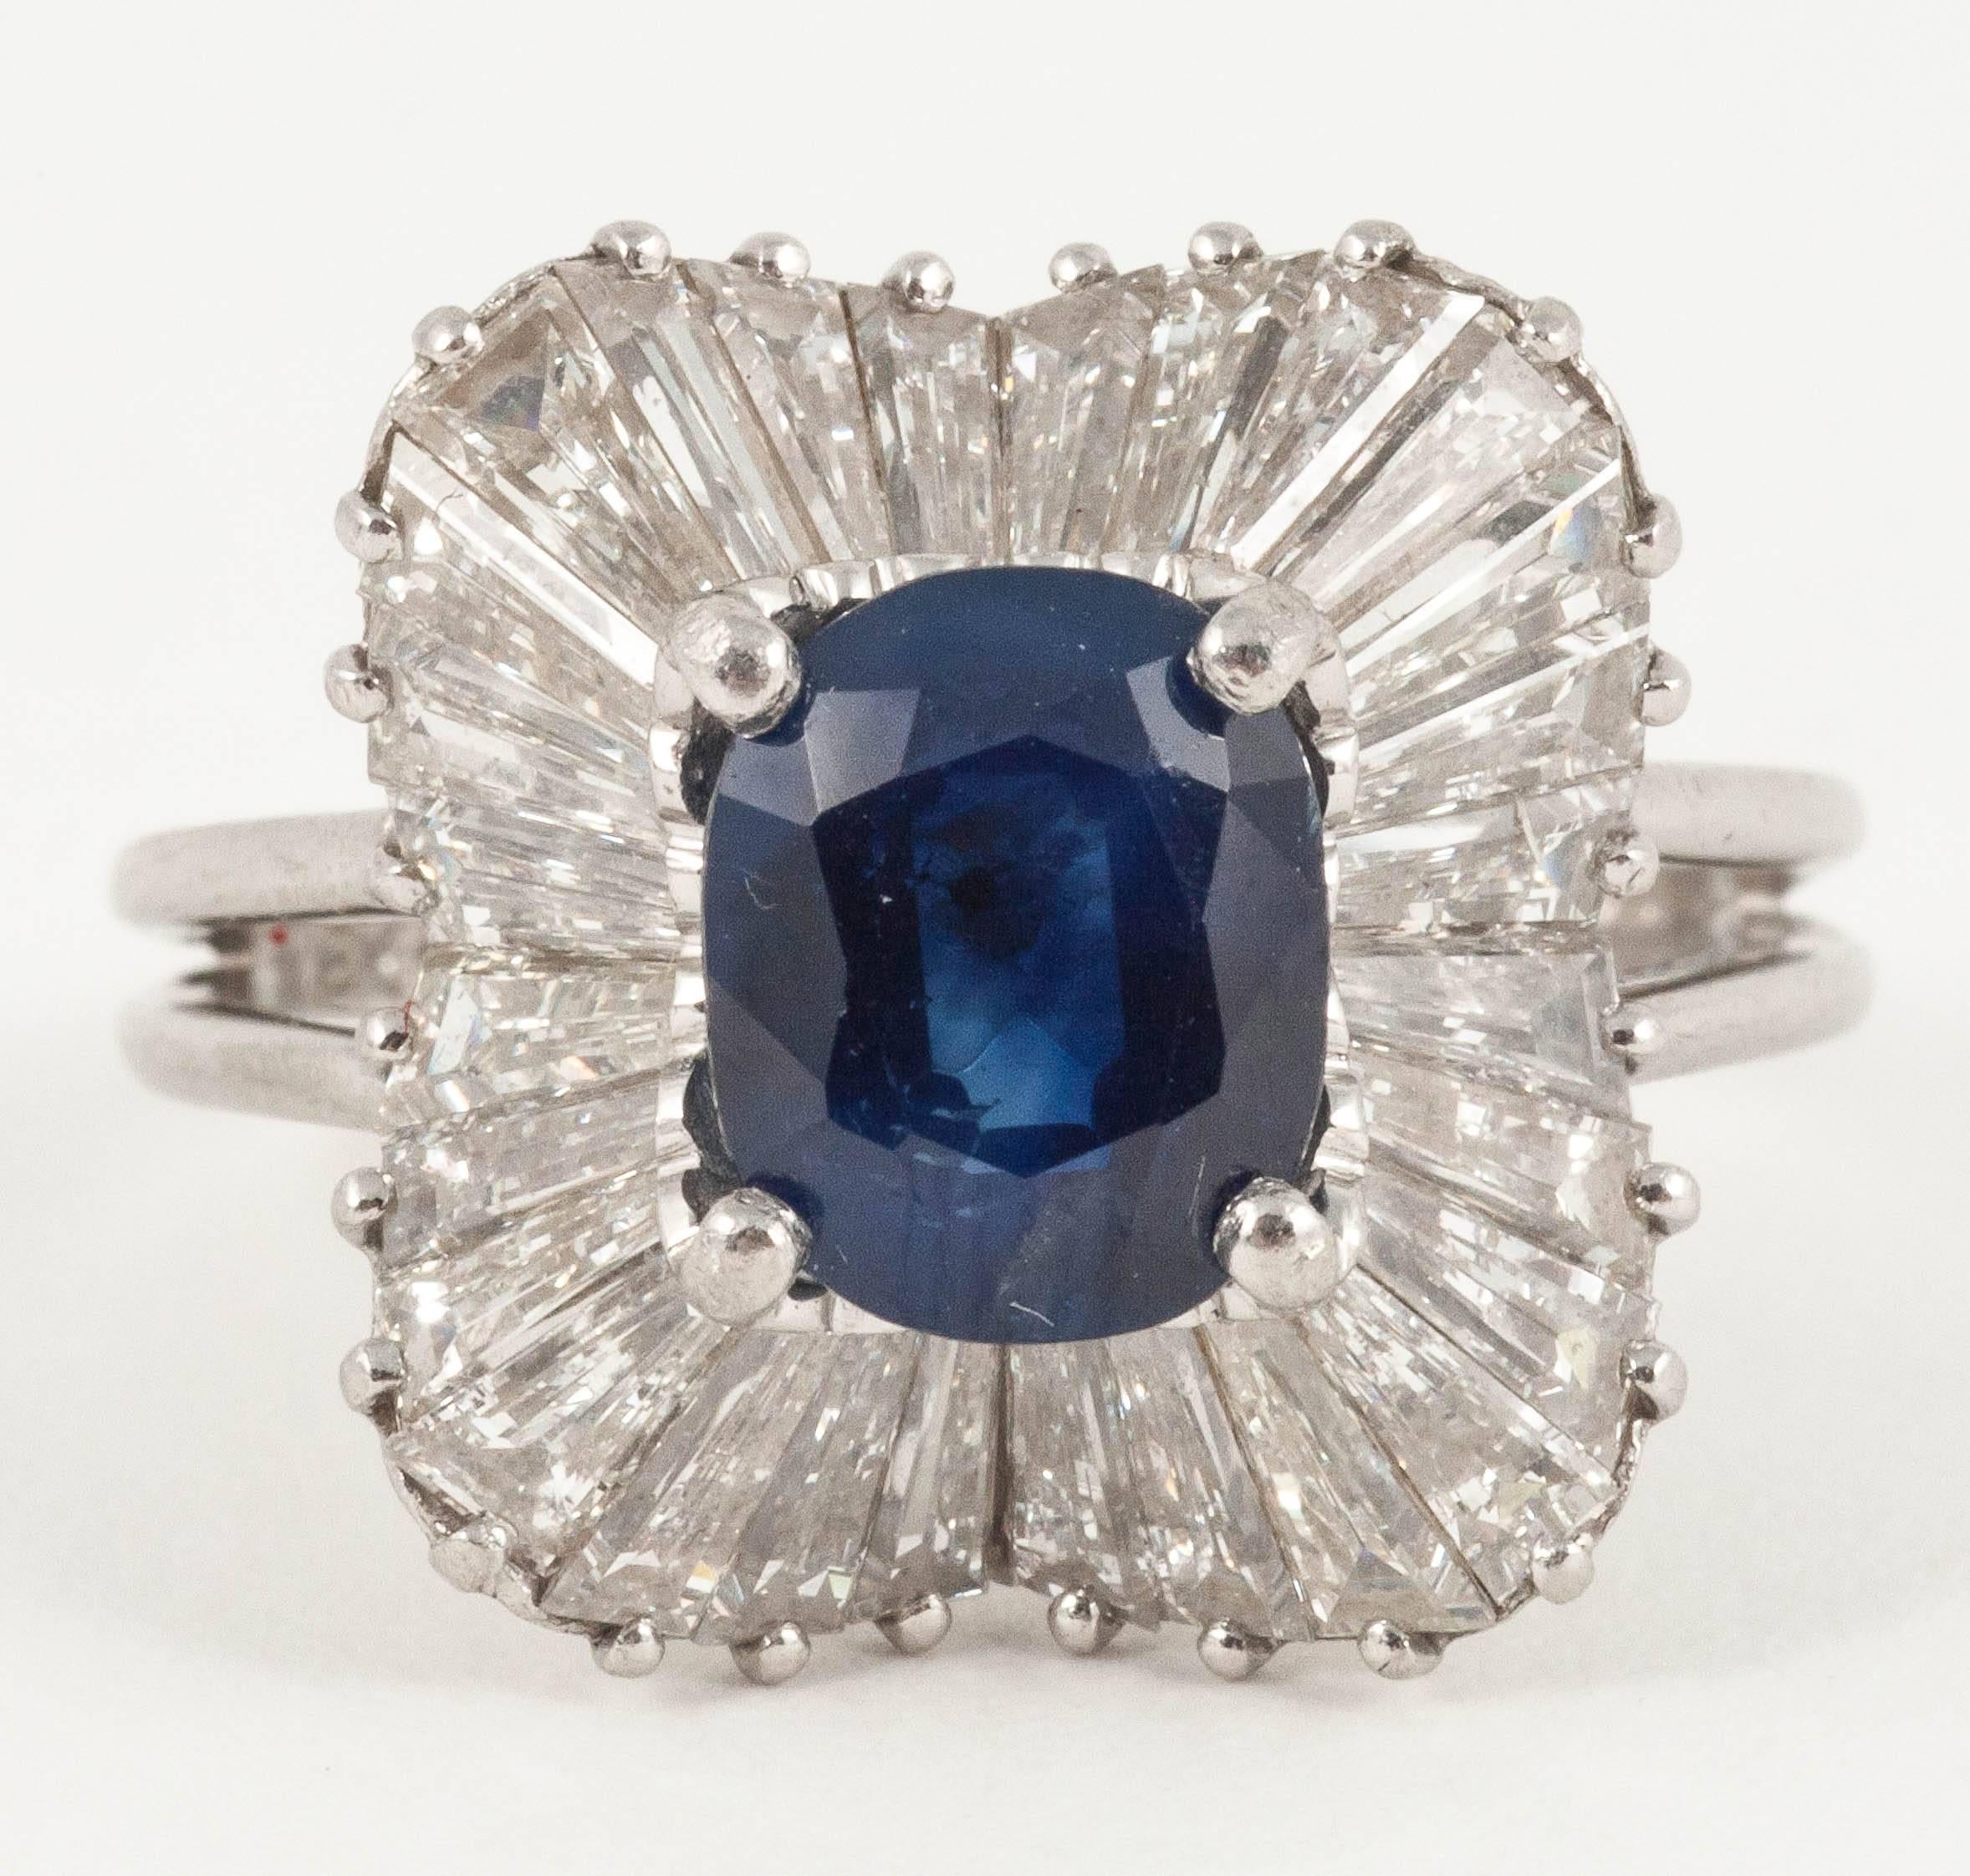 This 1960's Ballerina ring is set with natural Ceylon Sapphire surrounded with baguette Diamonds

Finger size M
